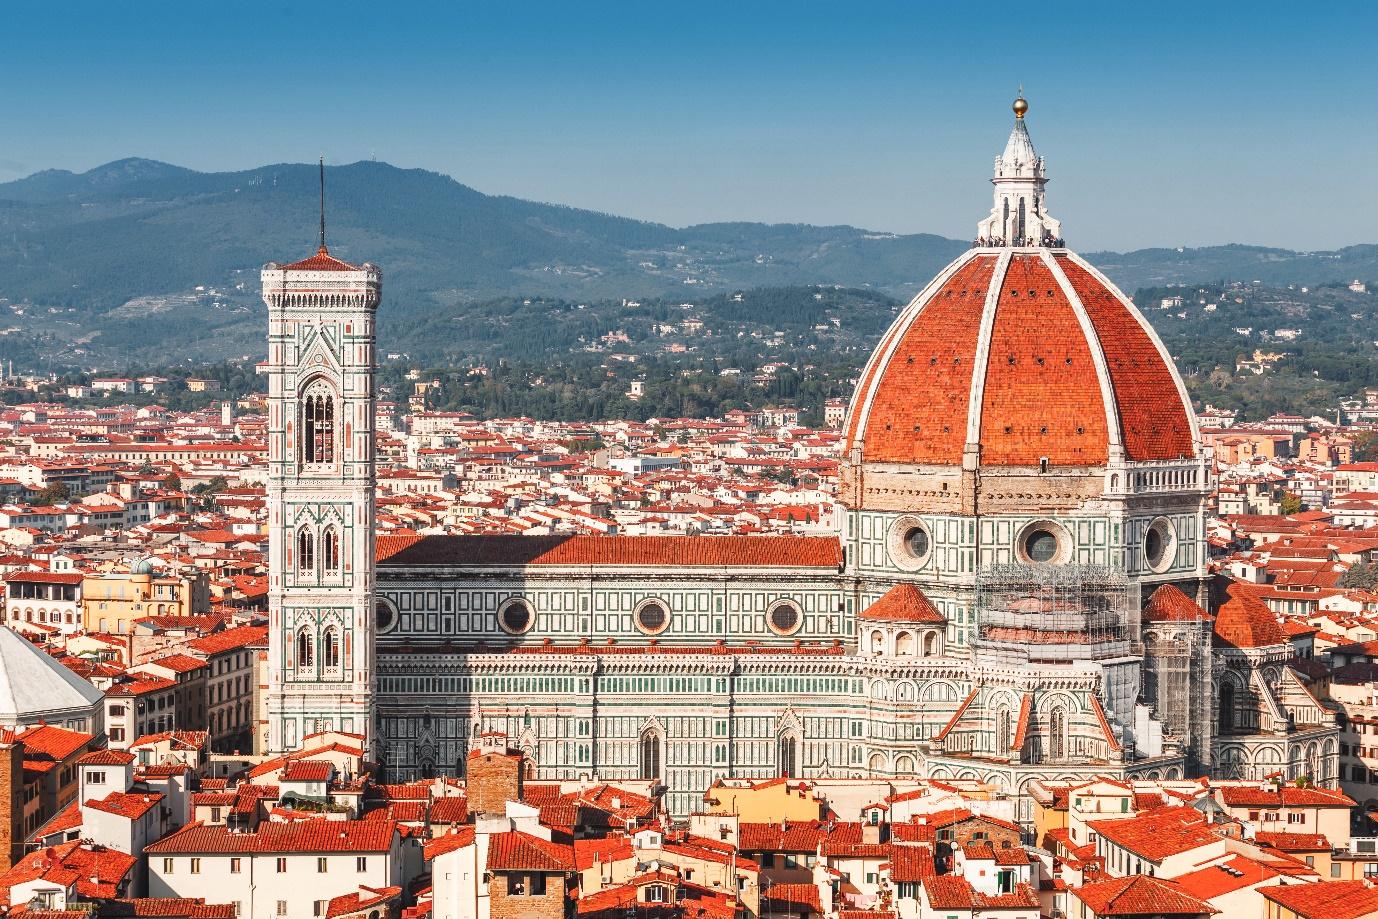 A large building with a dome and Florence Cathedral

Description automatically generated